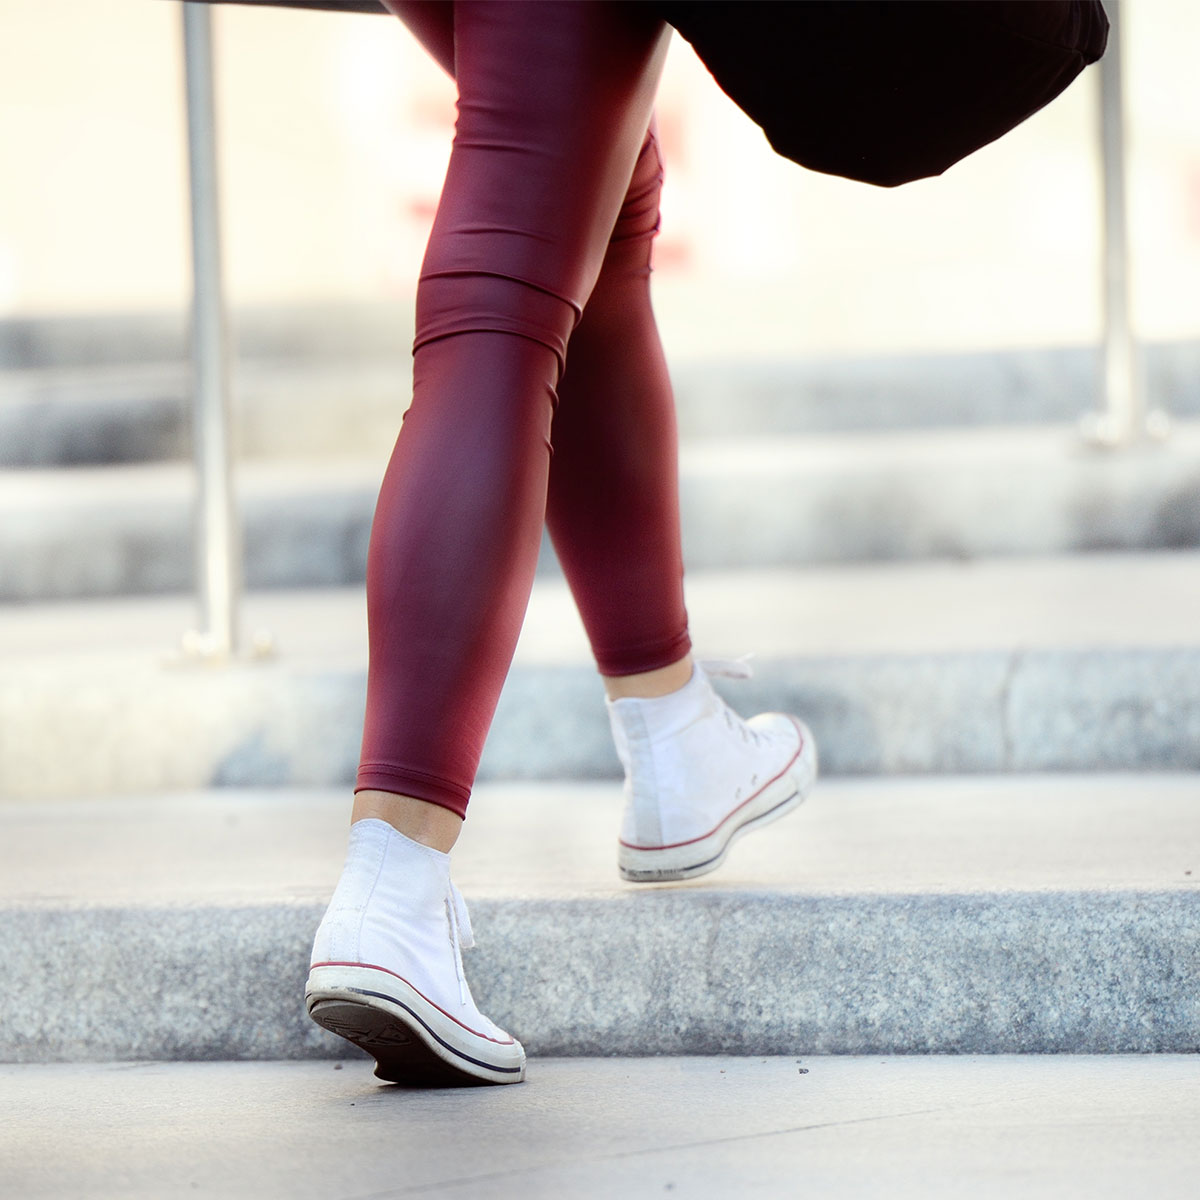 woman's legs walking up stairs outdoors